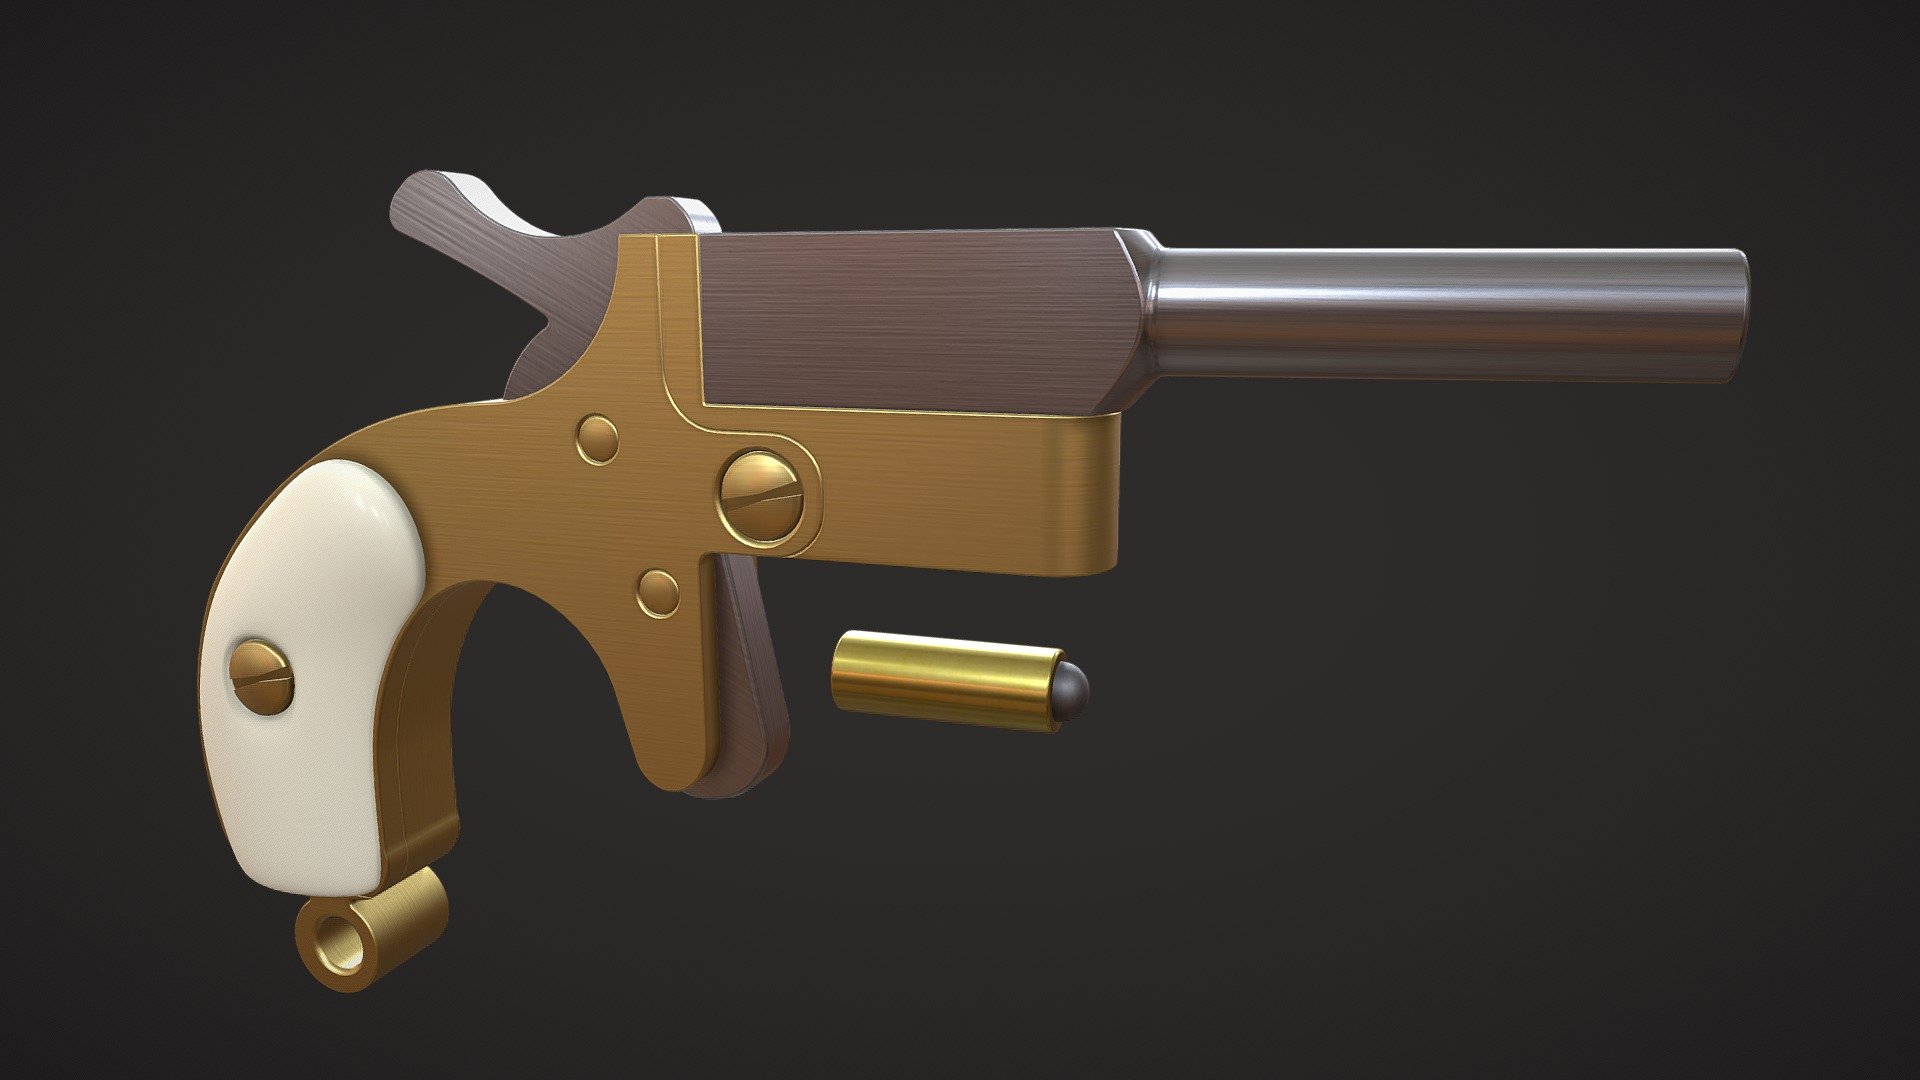 A simple model based on the 1mm Derringer pistol made by a professional jeweler and a watchmaker at Miniature arms https://minifirearms.com/. This pistol is currently the smallest production pistol in the world at 26mm in length and 15mmin height while being chambered in the smallest centerfire production cartridges the1X38mm cartridge. The 1mm Derringer Pistol is even smaller than the commonly claimed as being the smallest pistol in the world the 2.7mm Kolibri pistol. The 1mm Derringers are crafted from fine materials like silver and gold (this one is in gold whith Ivory gripscales) 3d model